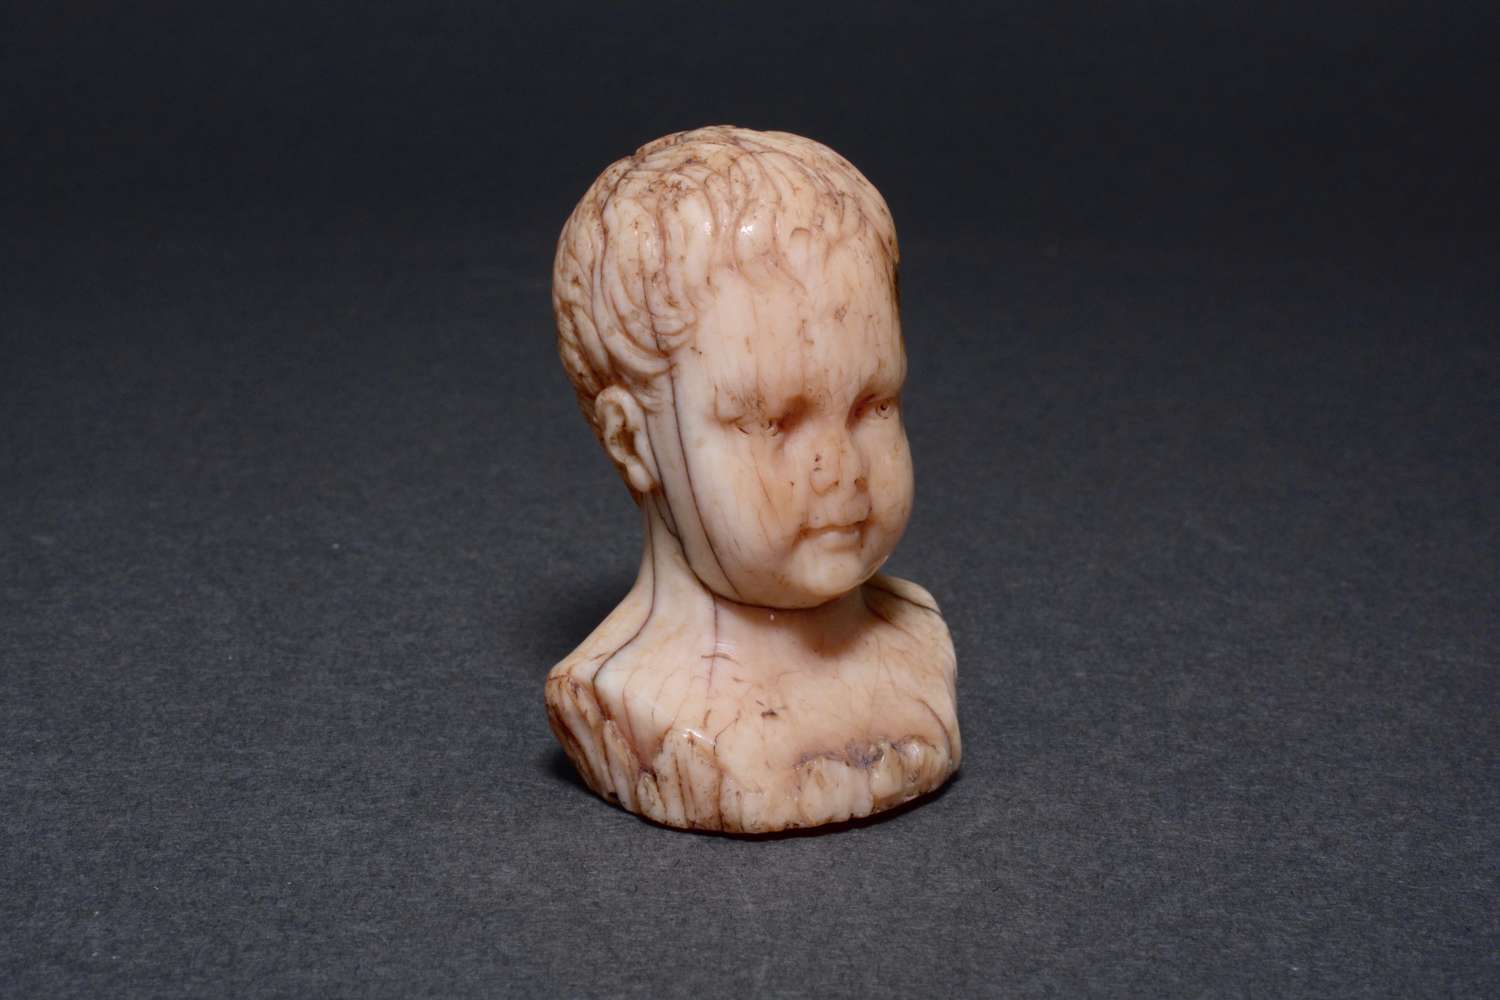 A wonderfully tactile antique bust of a child.